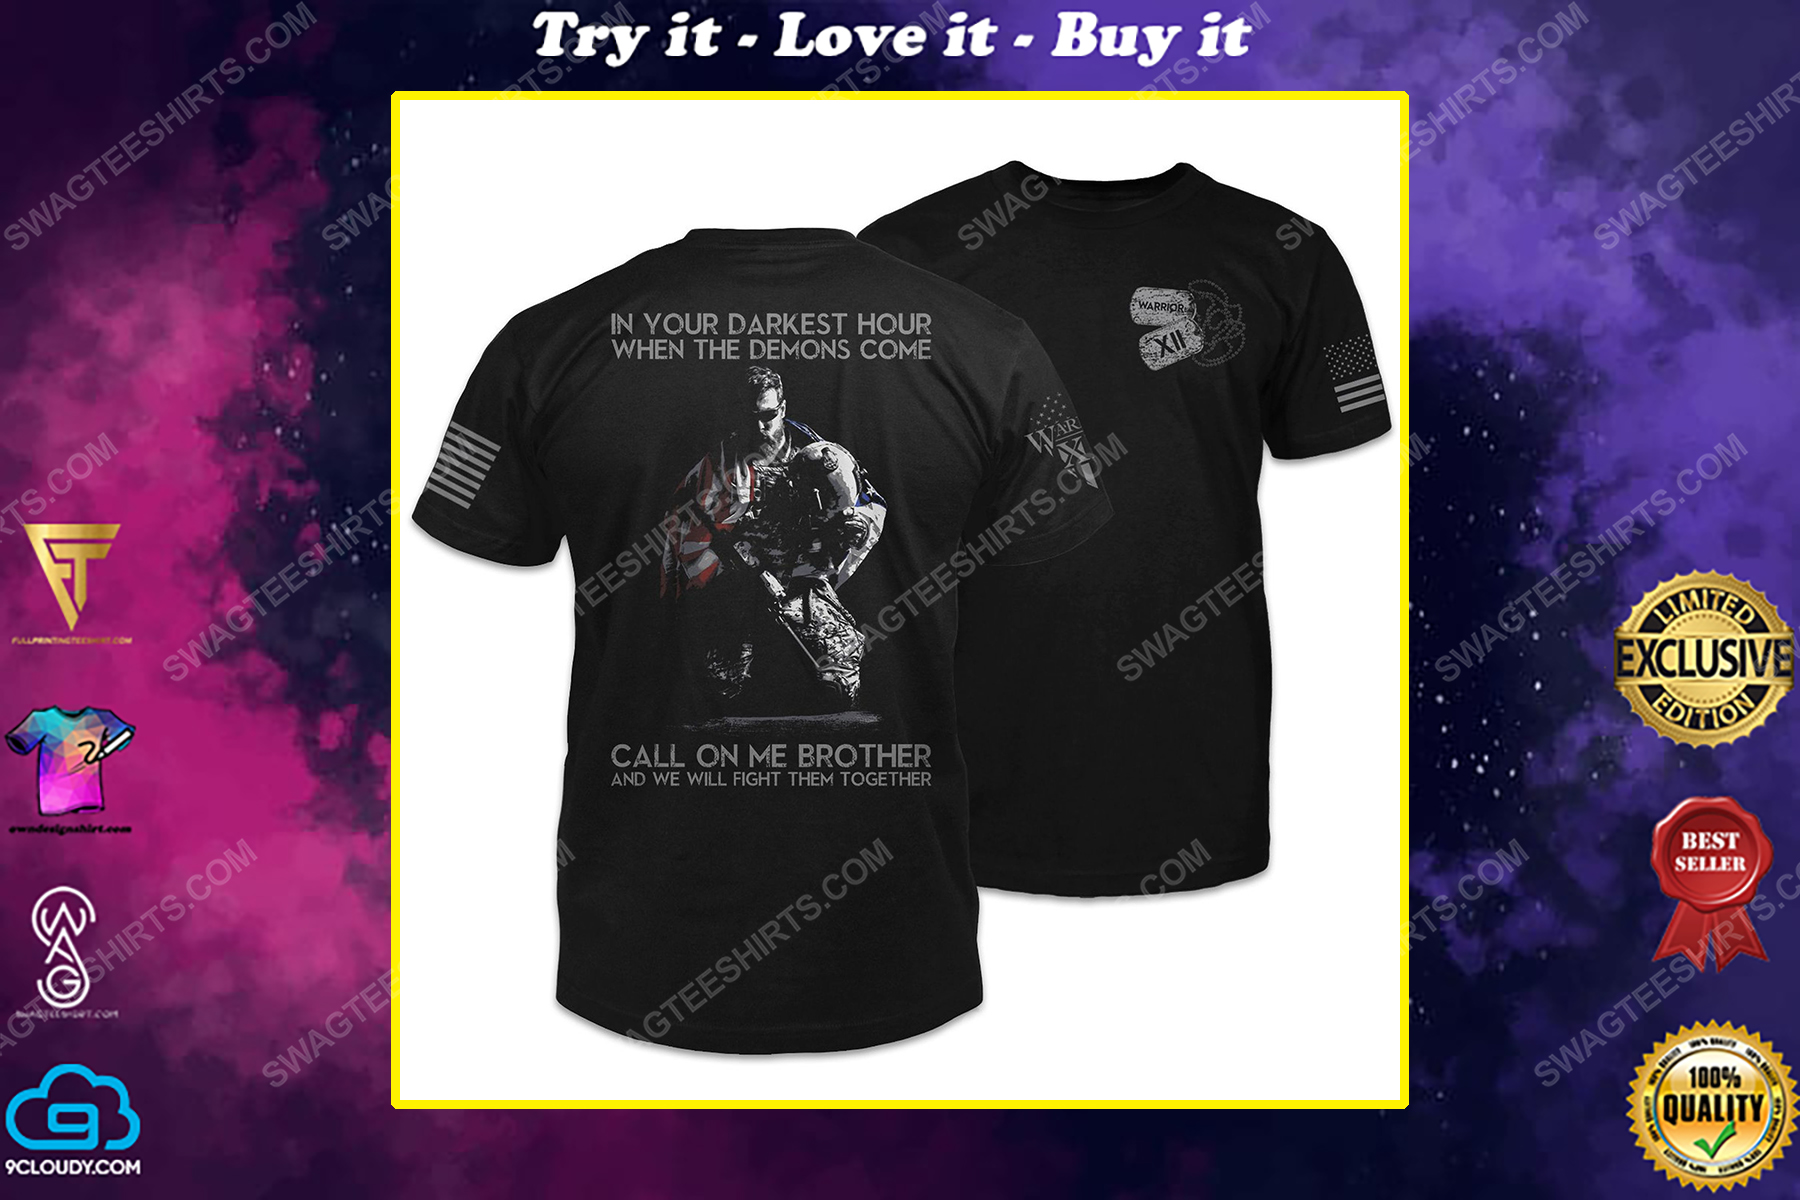 In your darkest hour when the demons come call on me brother and we will fight them together veteran shirt